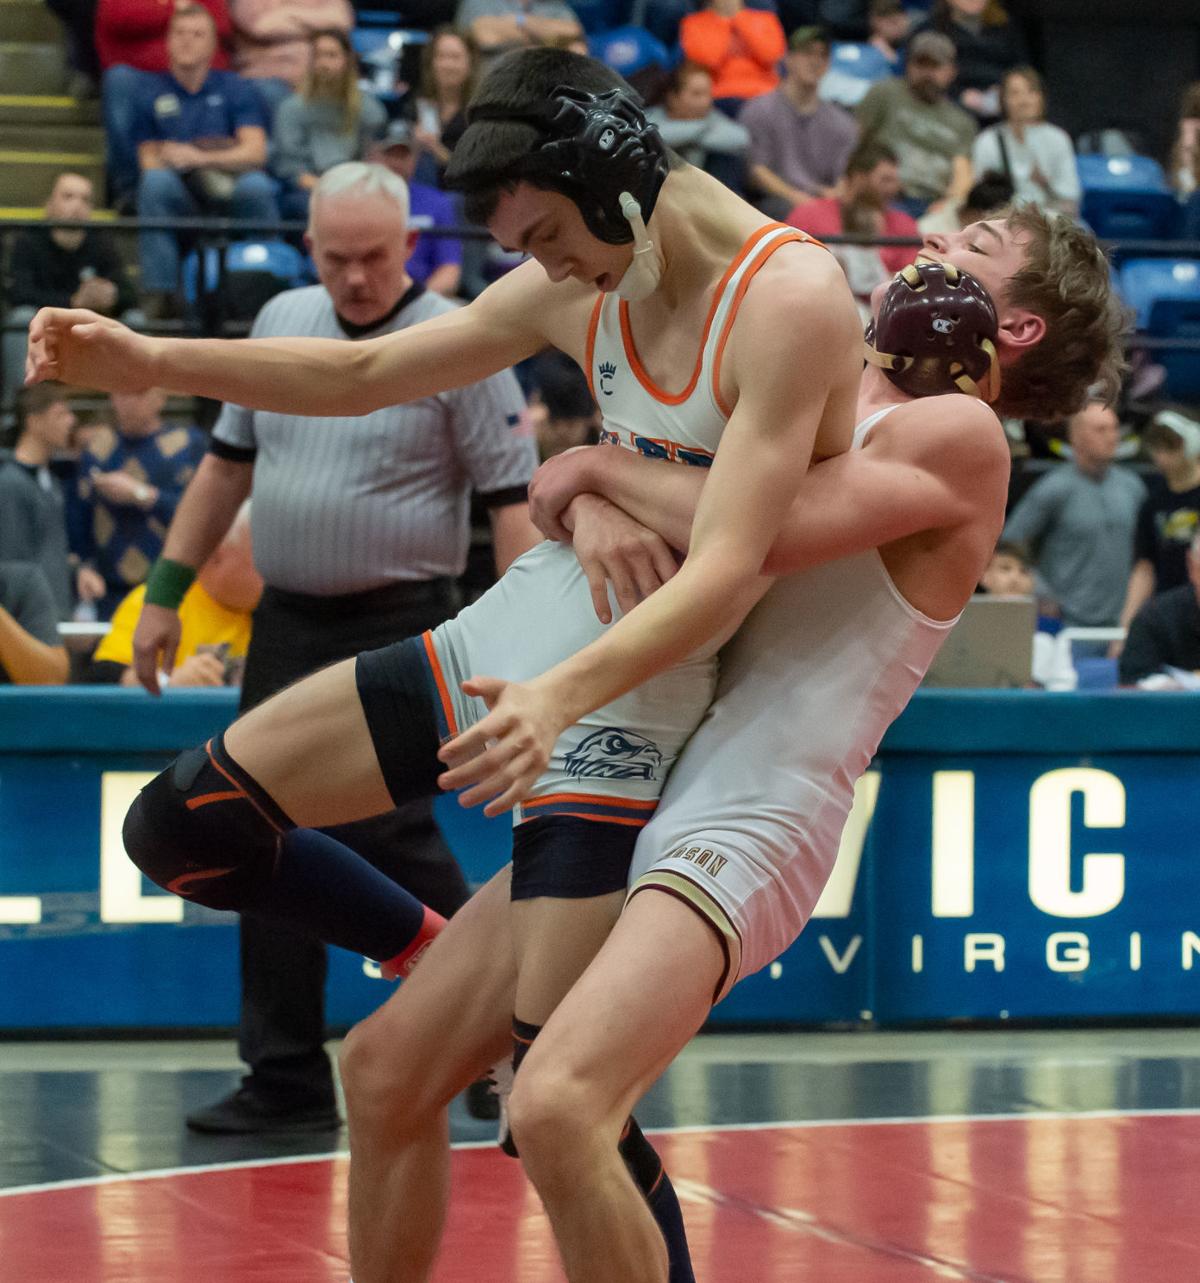 Scenes from the Class 2 title bouts at the VHSL state wrestling tournament